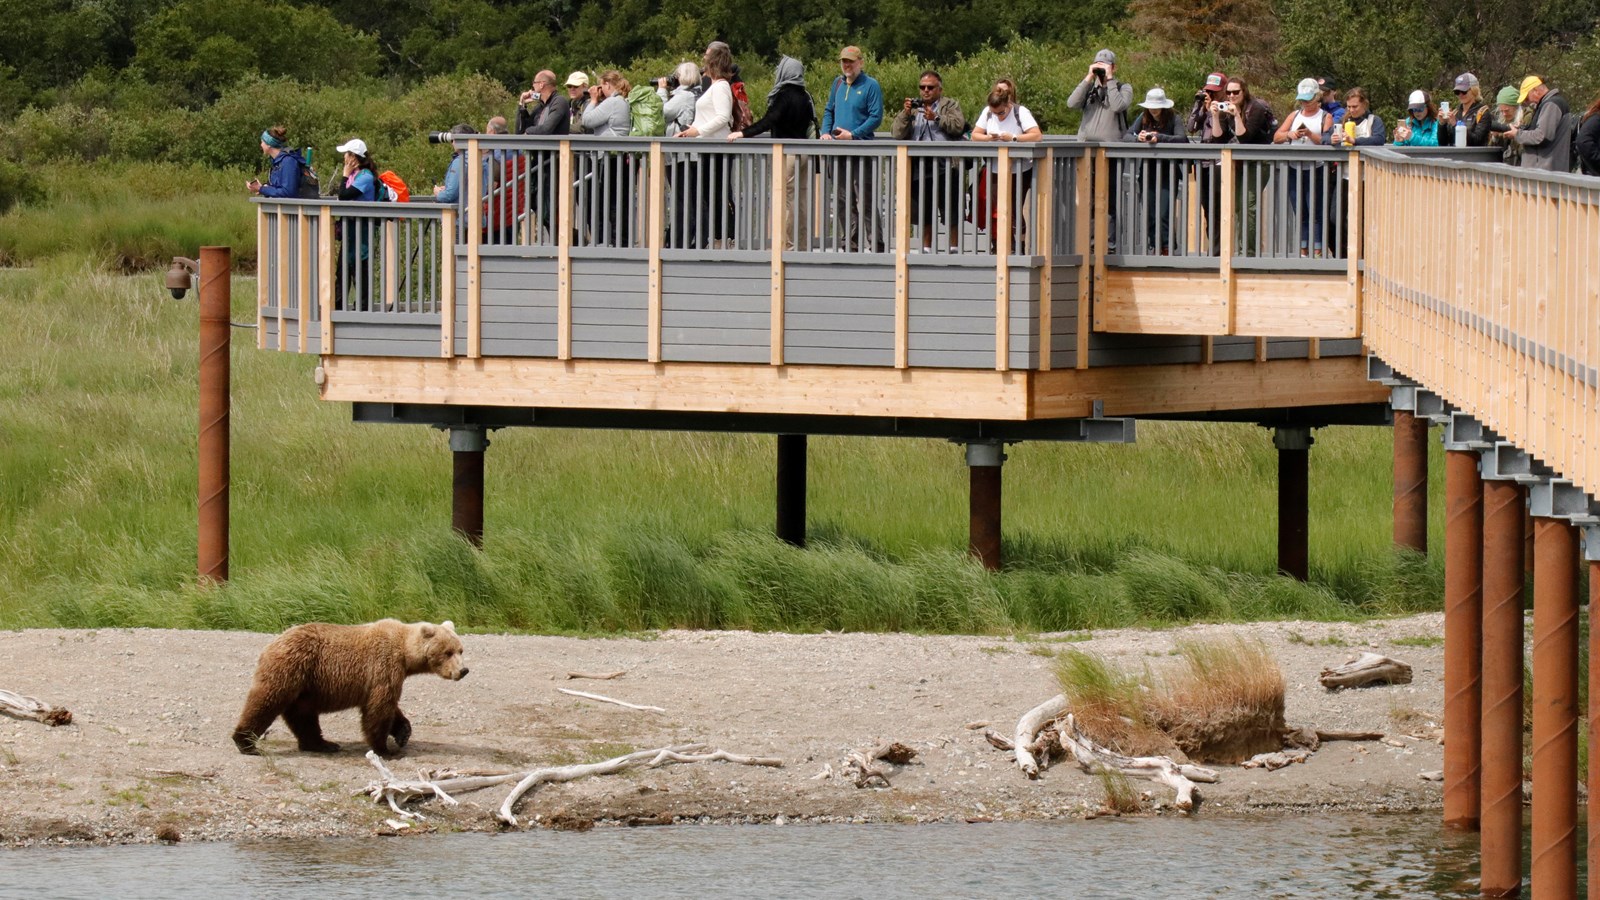 Visitors on an elevated platform looking down at a bear